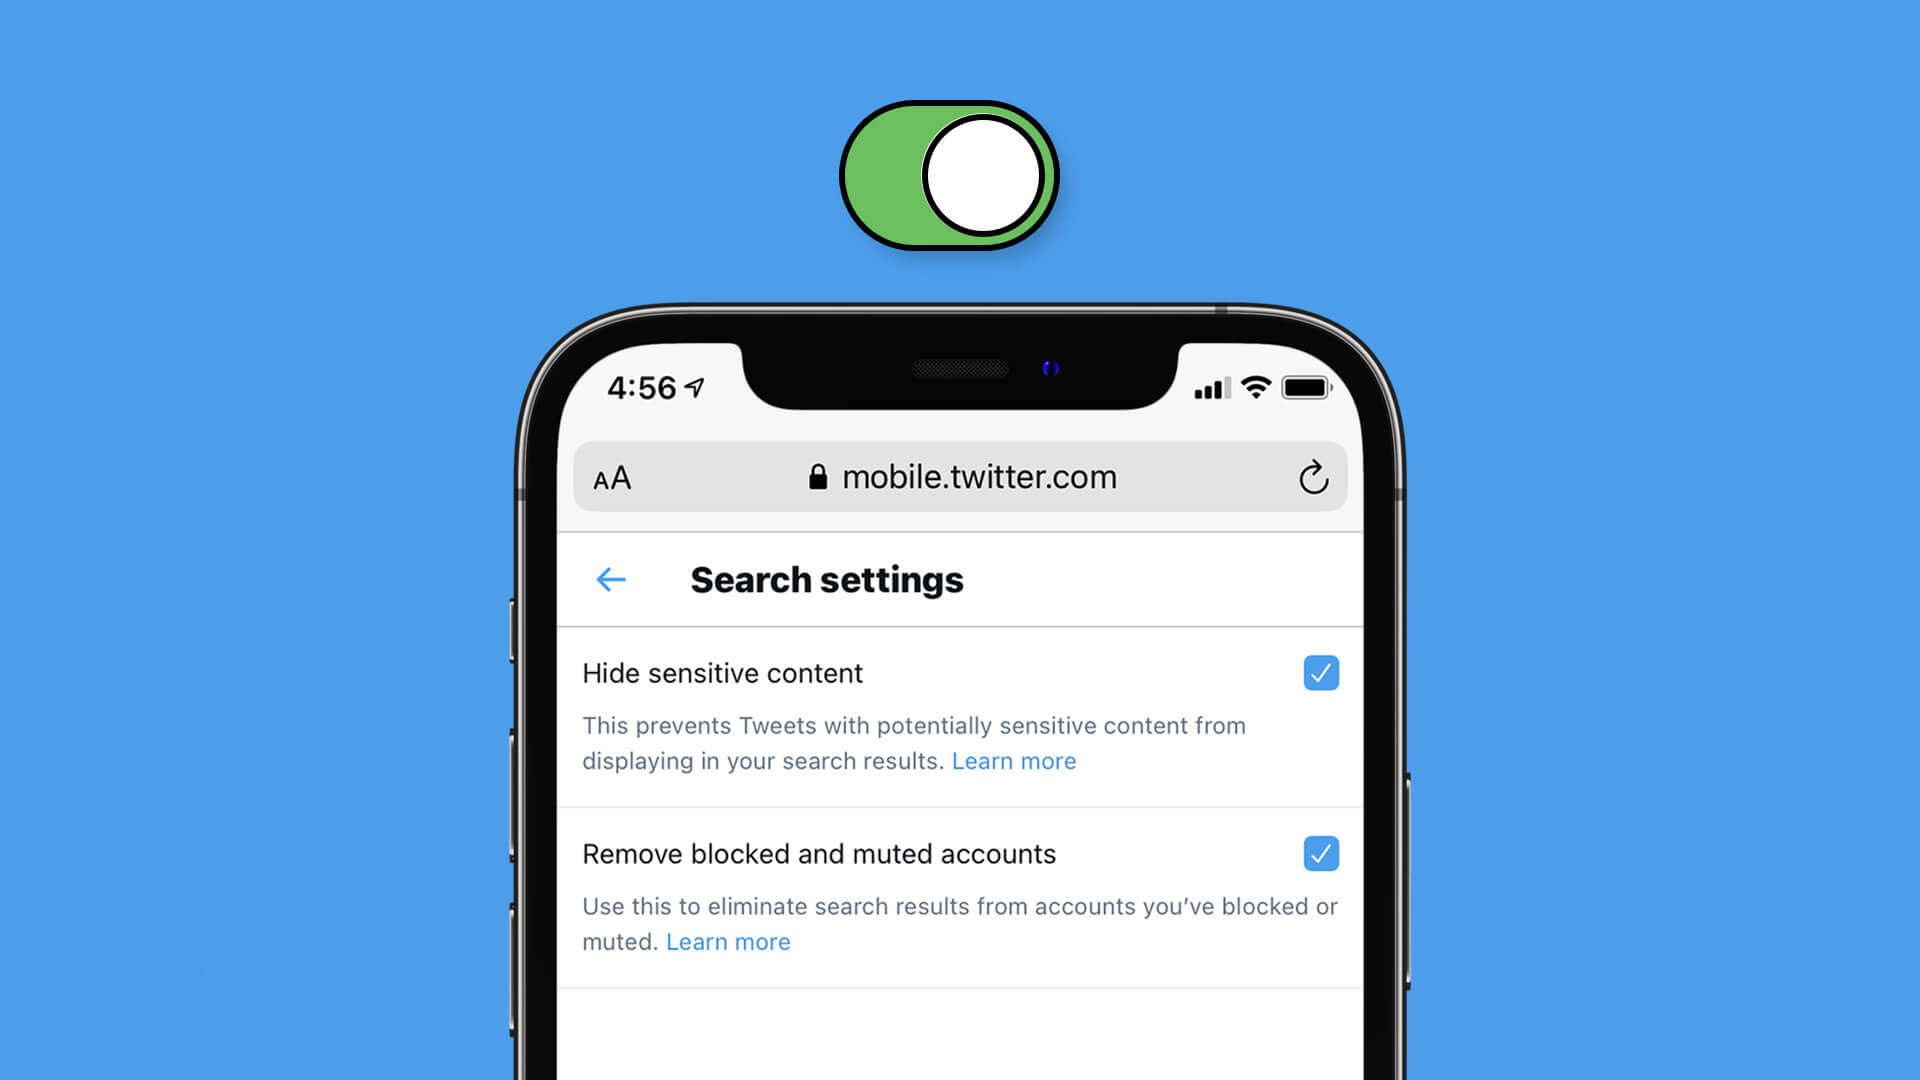 How to turn off SafeSearch on iPhone?